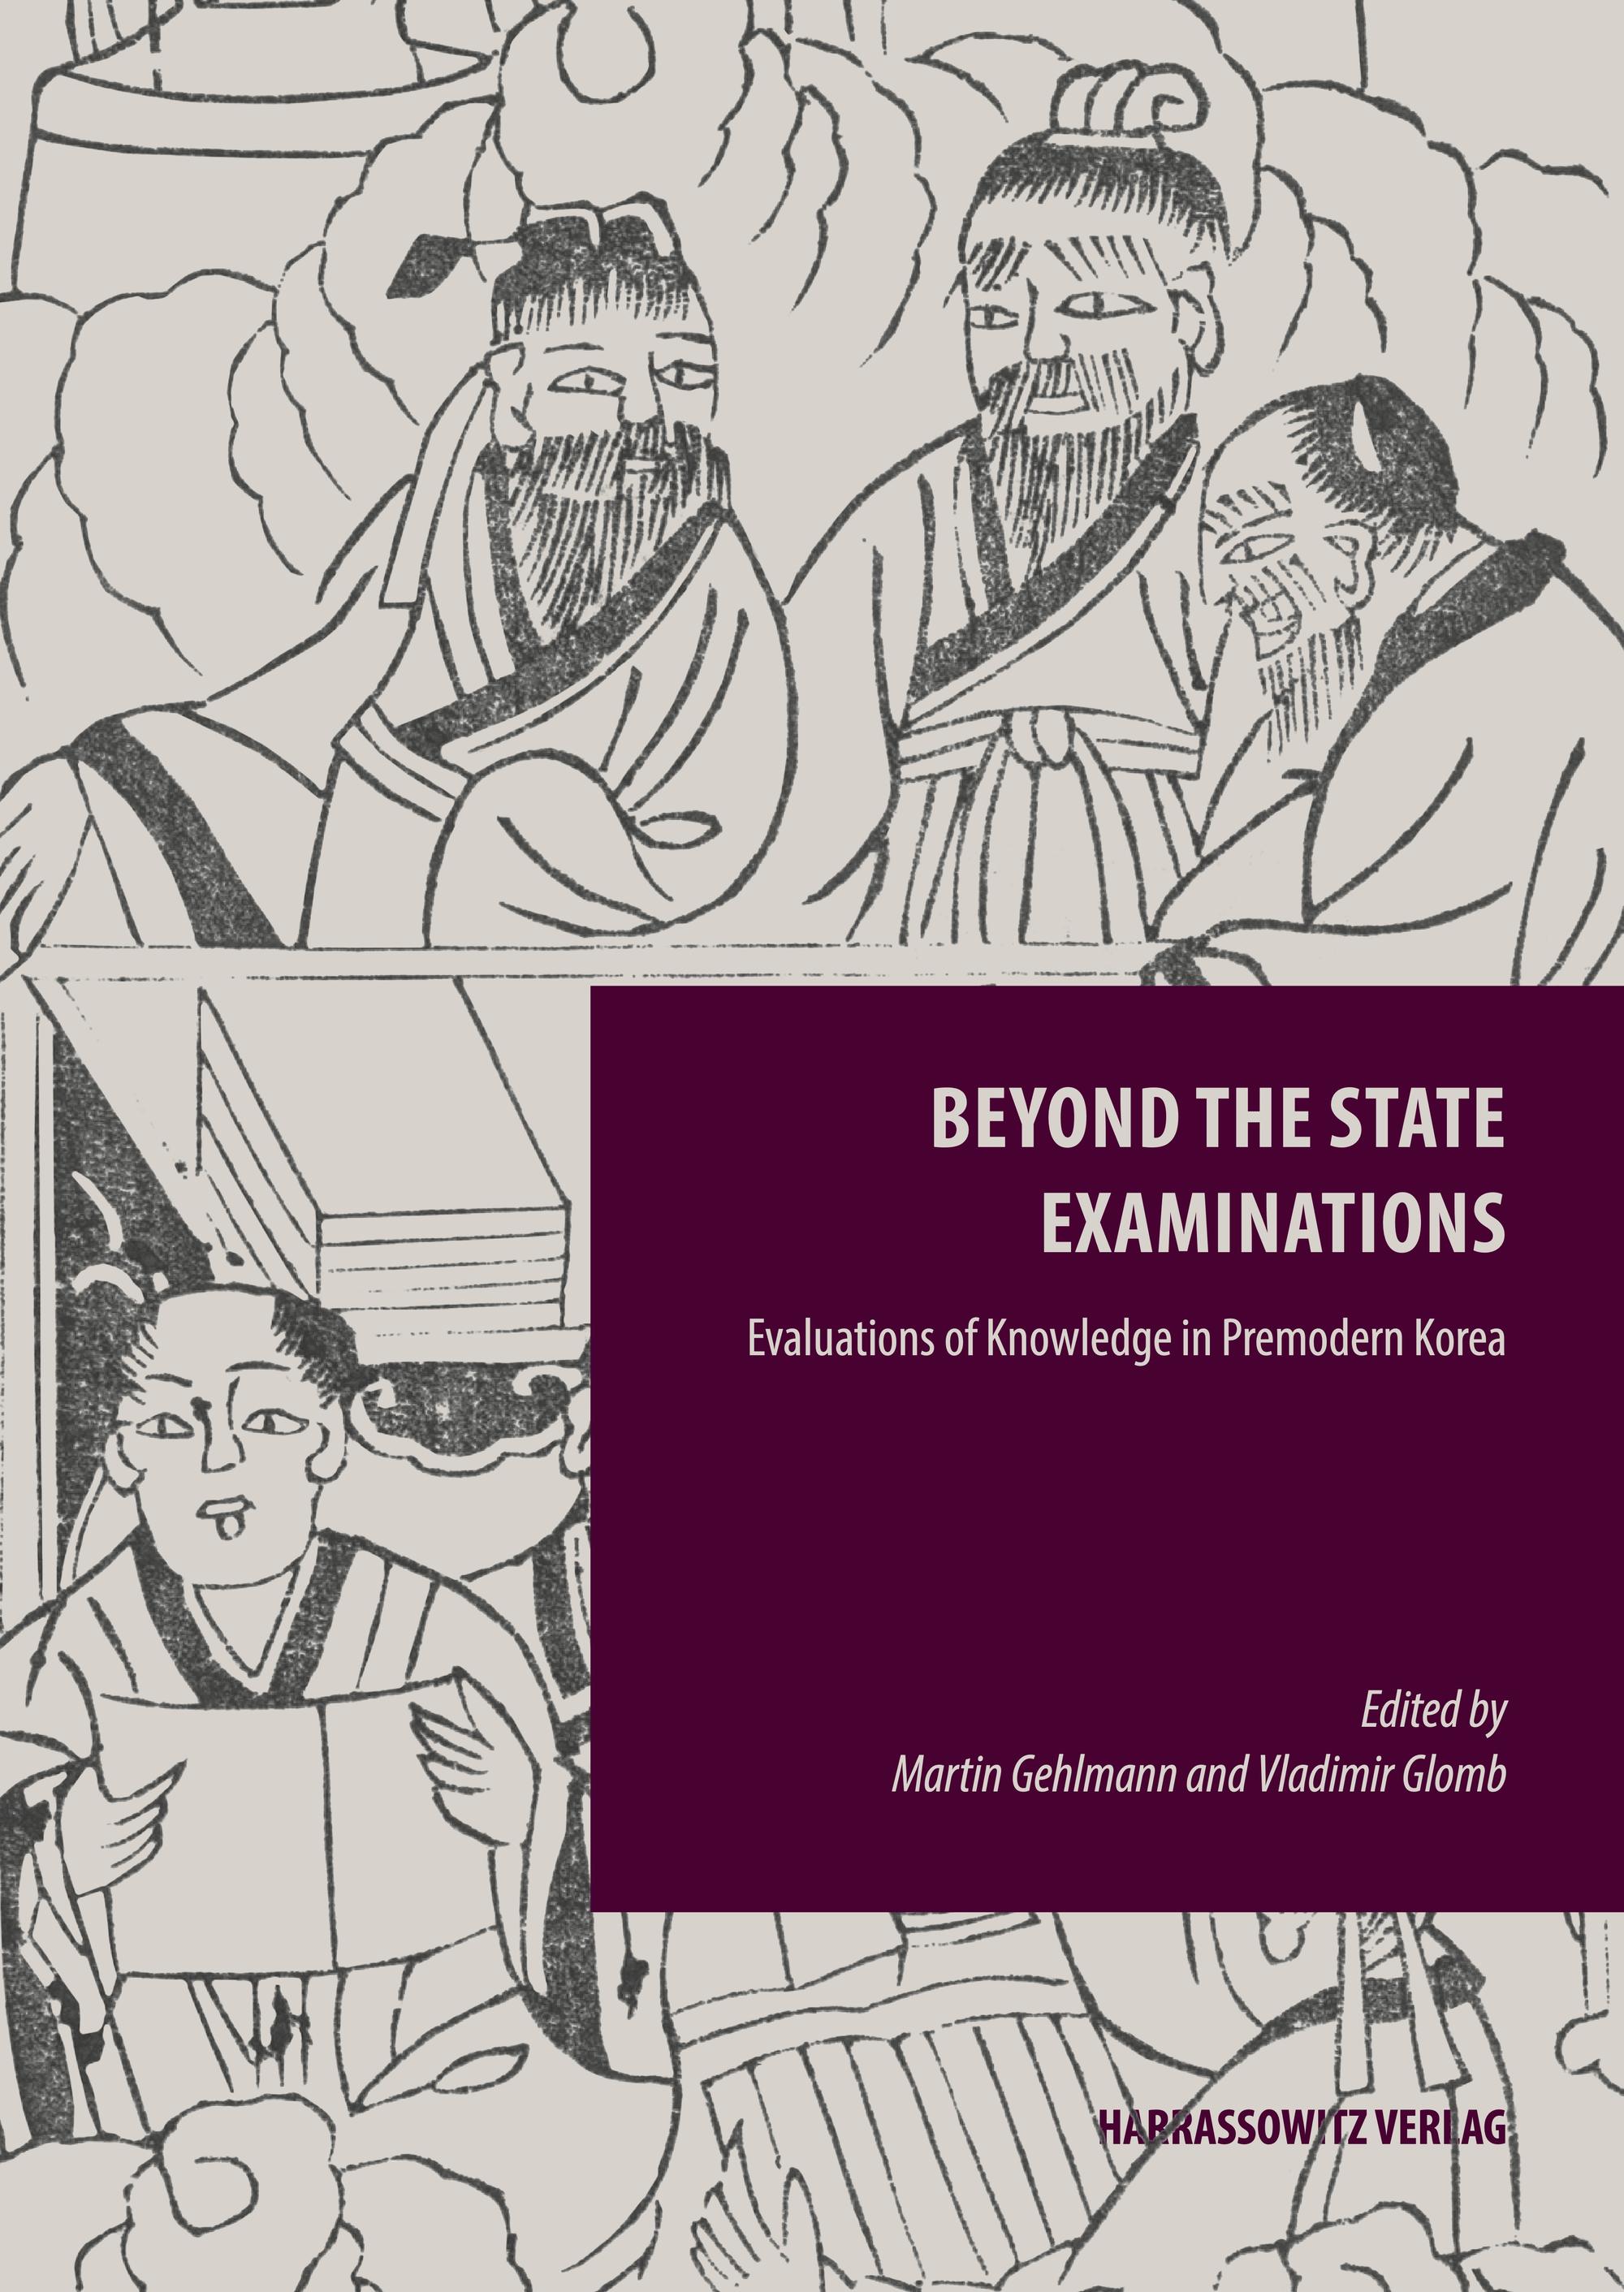 Beyond the State - Examinations Evaluations of Knowledge in Premodern Korea